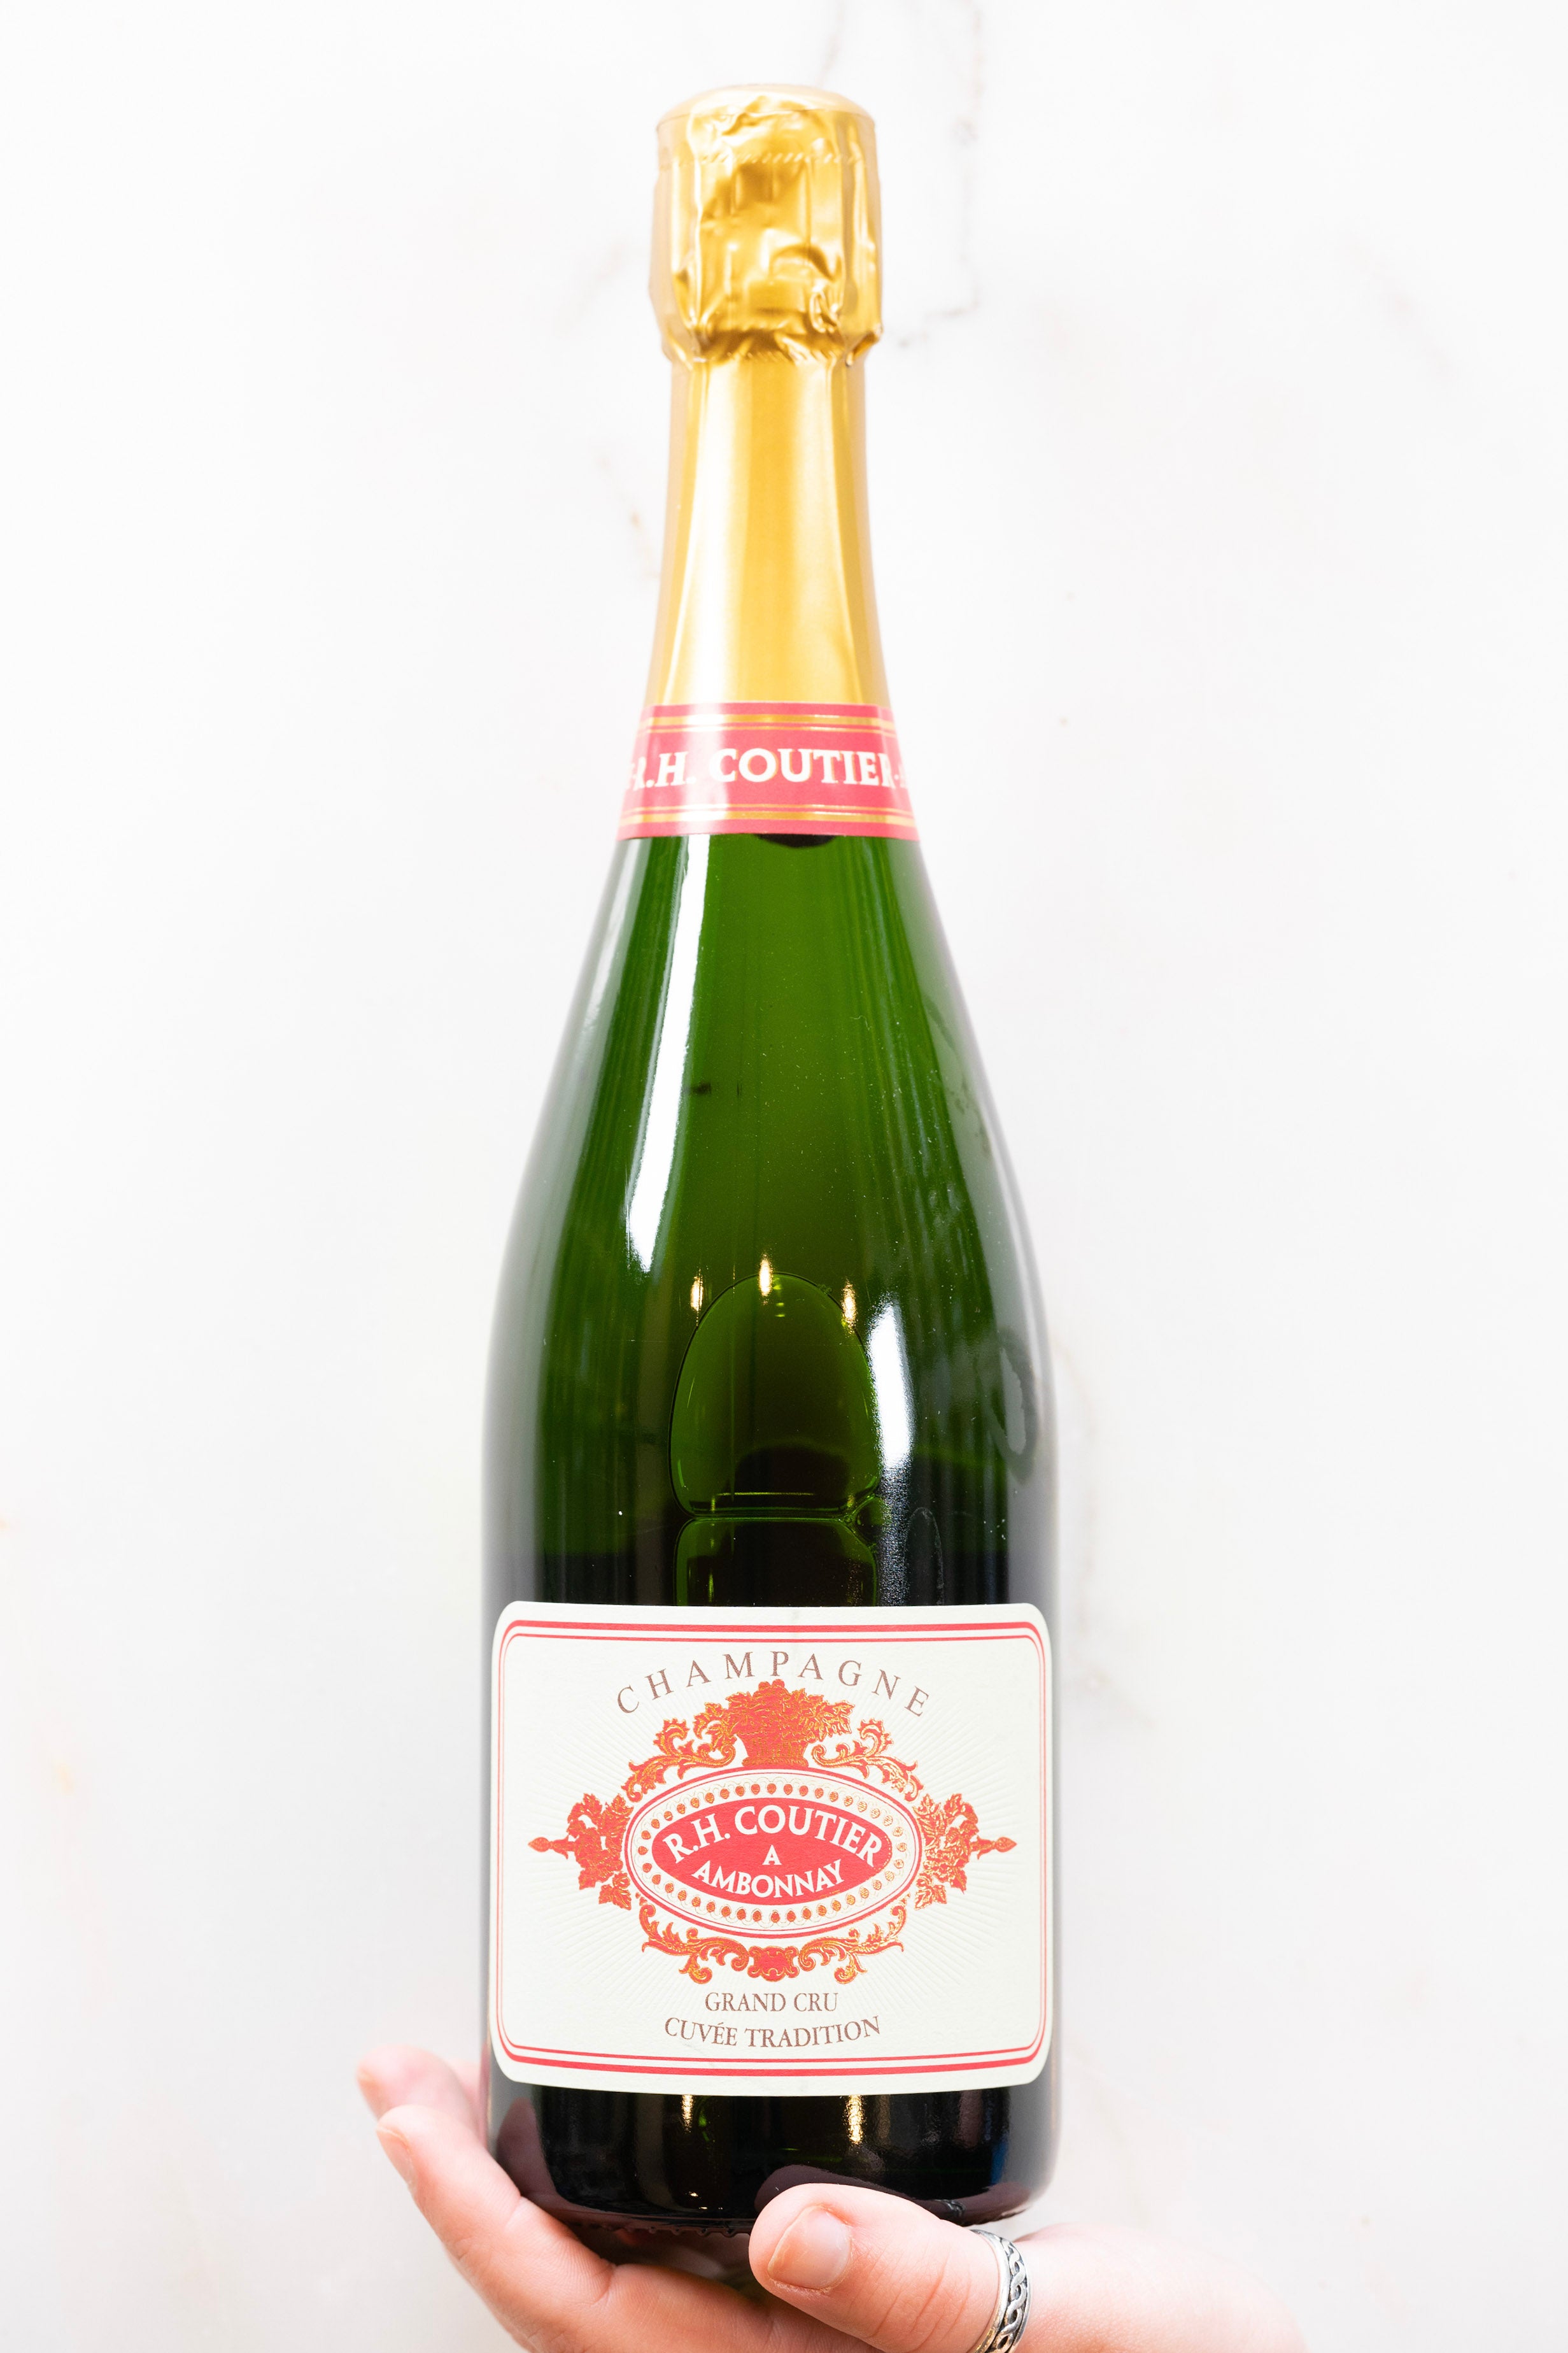 R.H. Coutier Champagne Tradition Grand Cru Brut NV